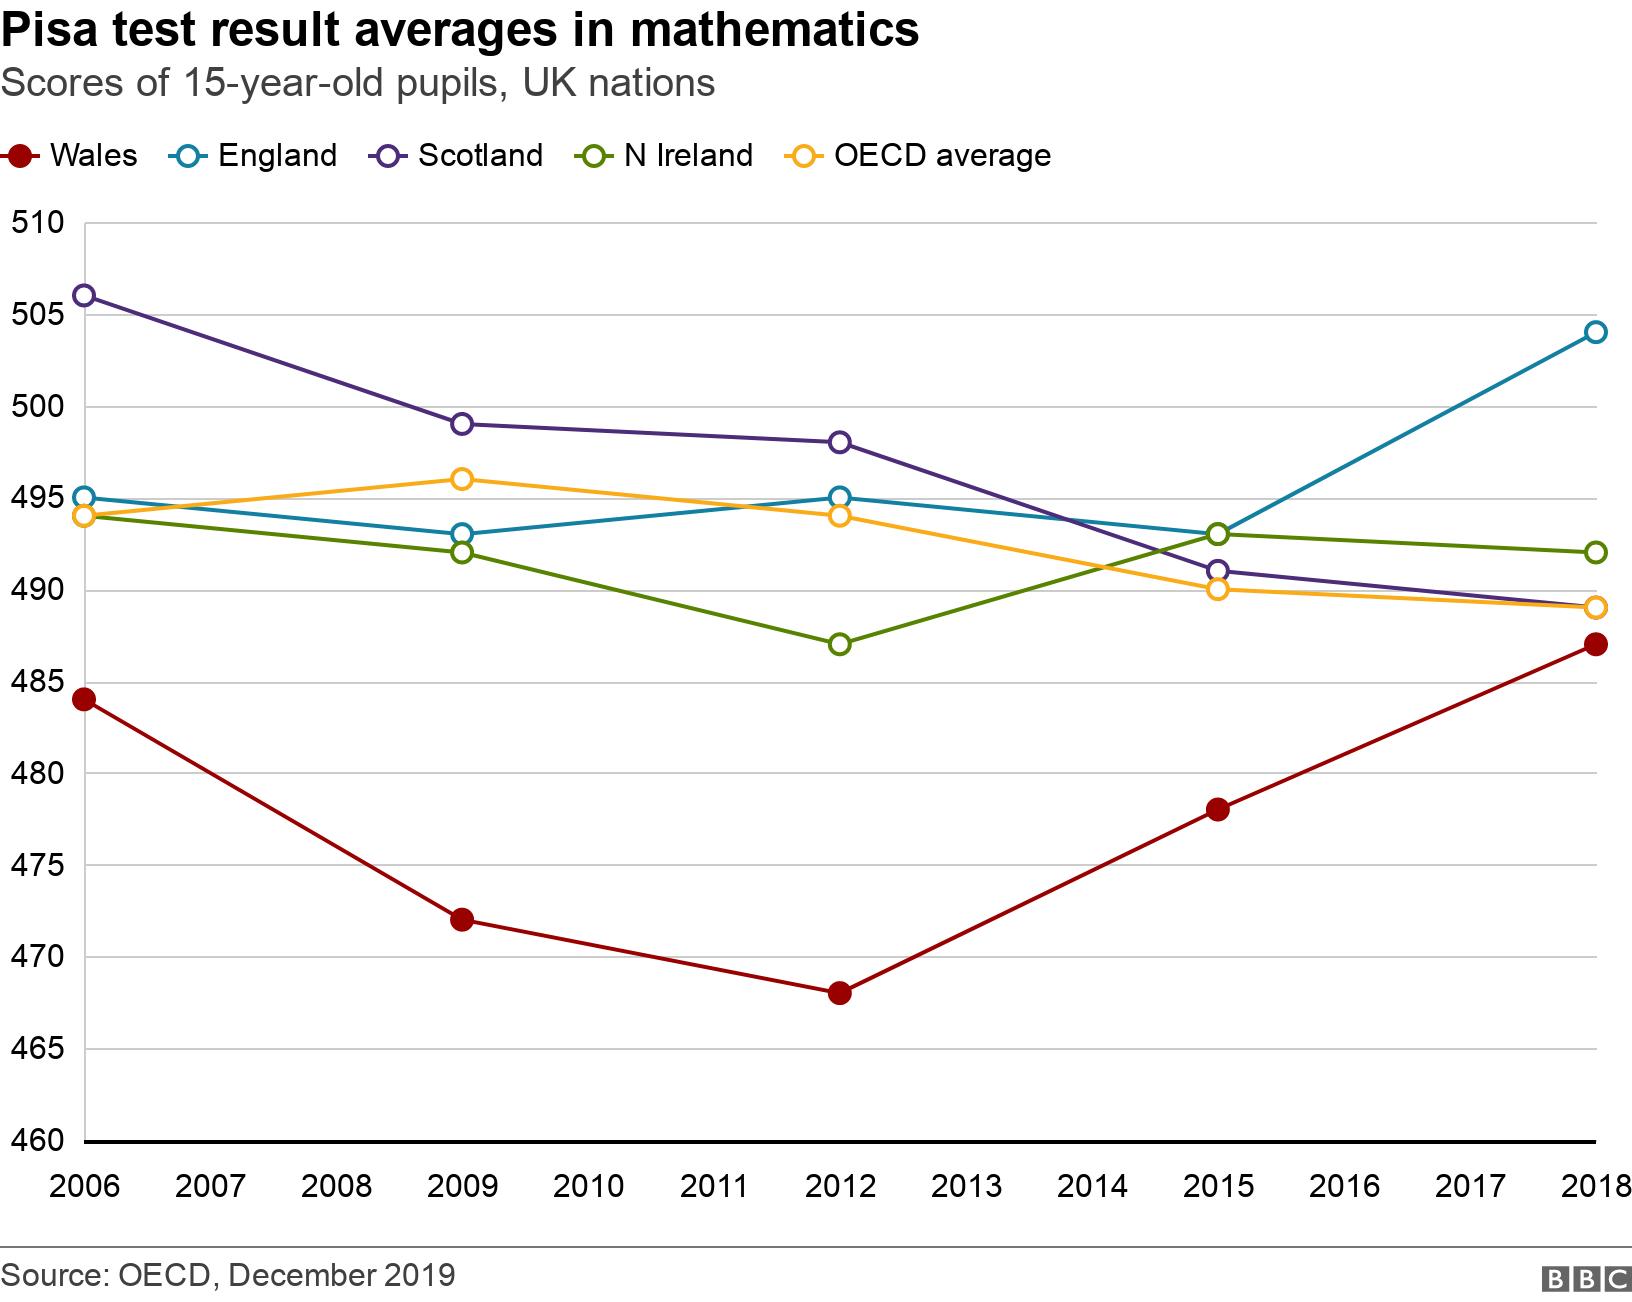 Pisa test result averages in mathematics. Scores of 15-year-old pupils, UK nations. .